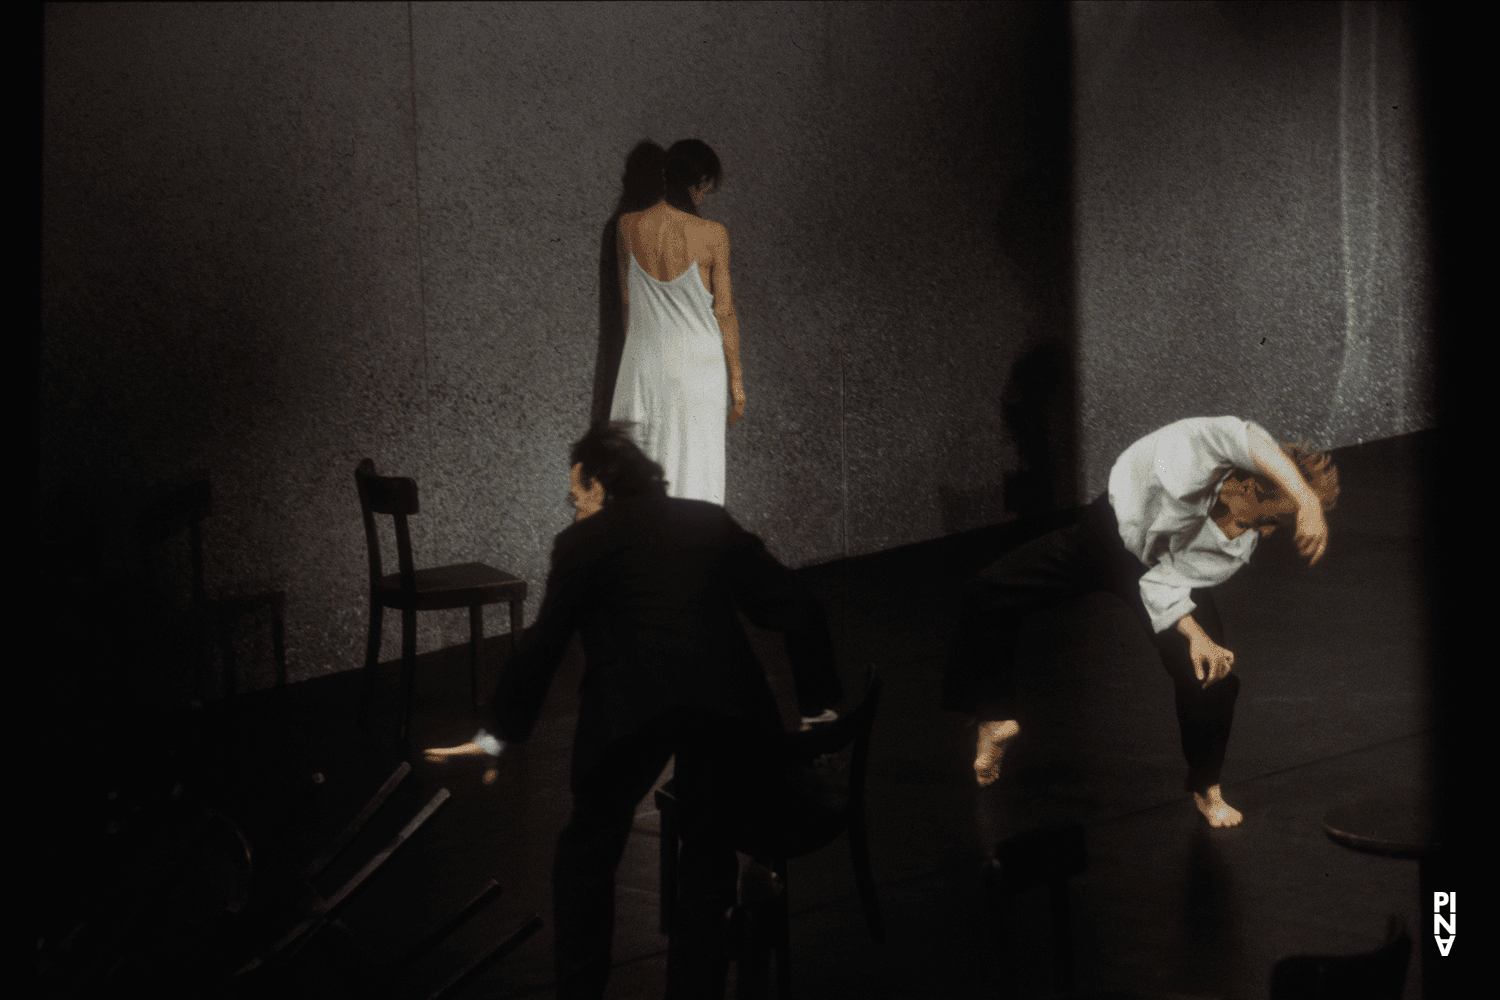 Dominique Mercy, Jean Laurent Sasportes and Pina Bausch in “Café Müller” by Pina Bausch